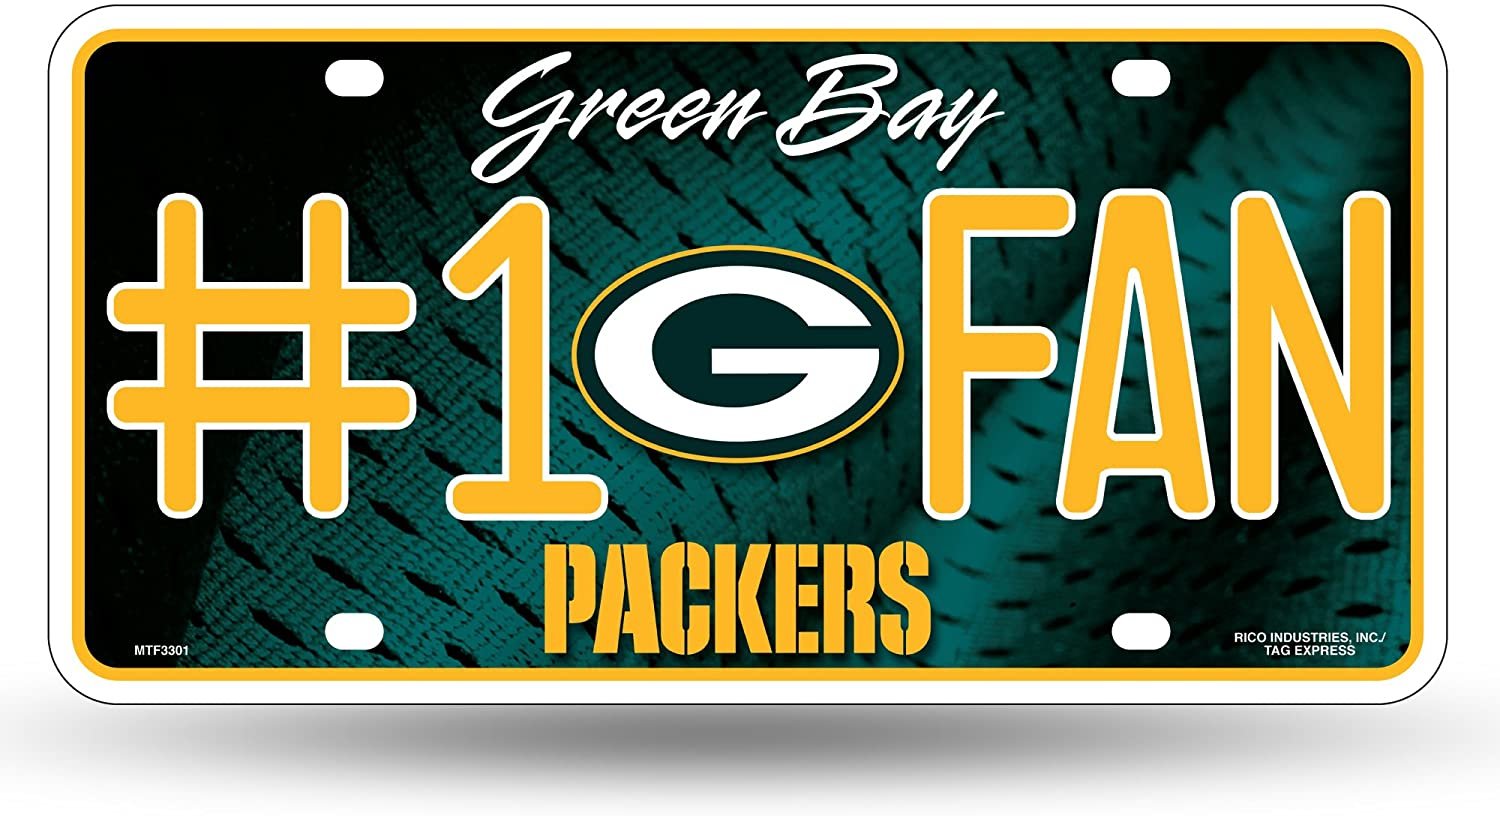 Green Bay Packers Metal Auto Tag License Plate, #1 Fan Design, 12x6 Inch